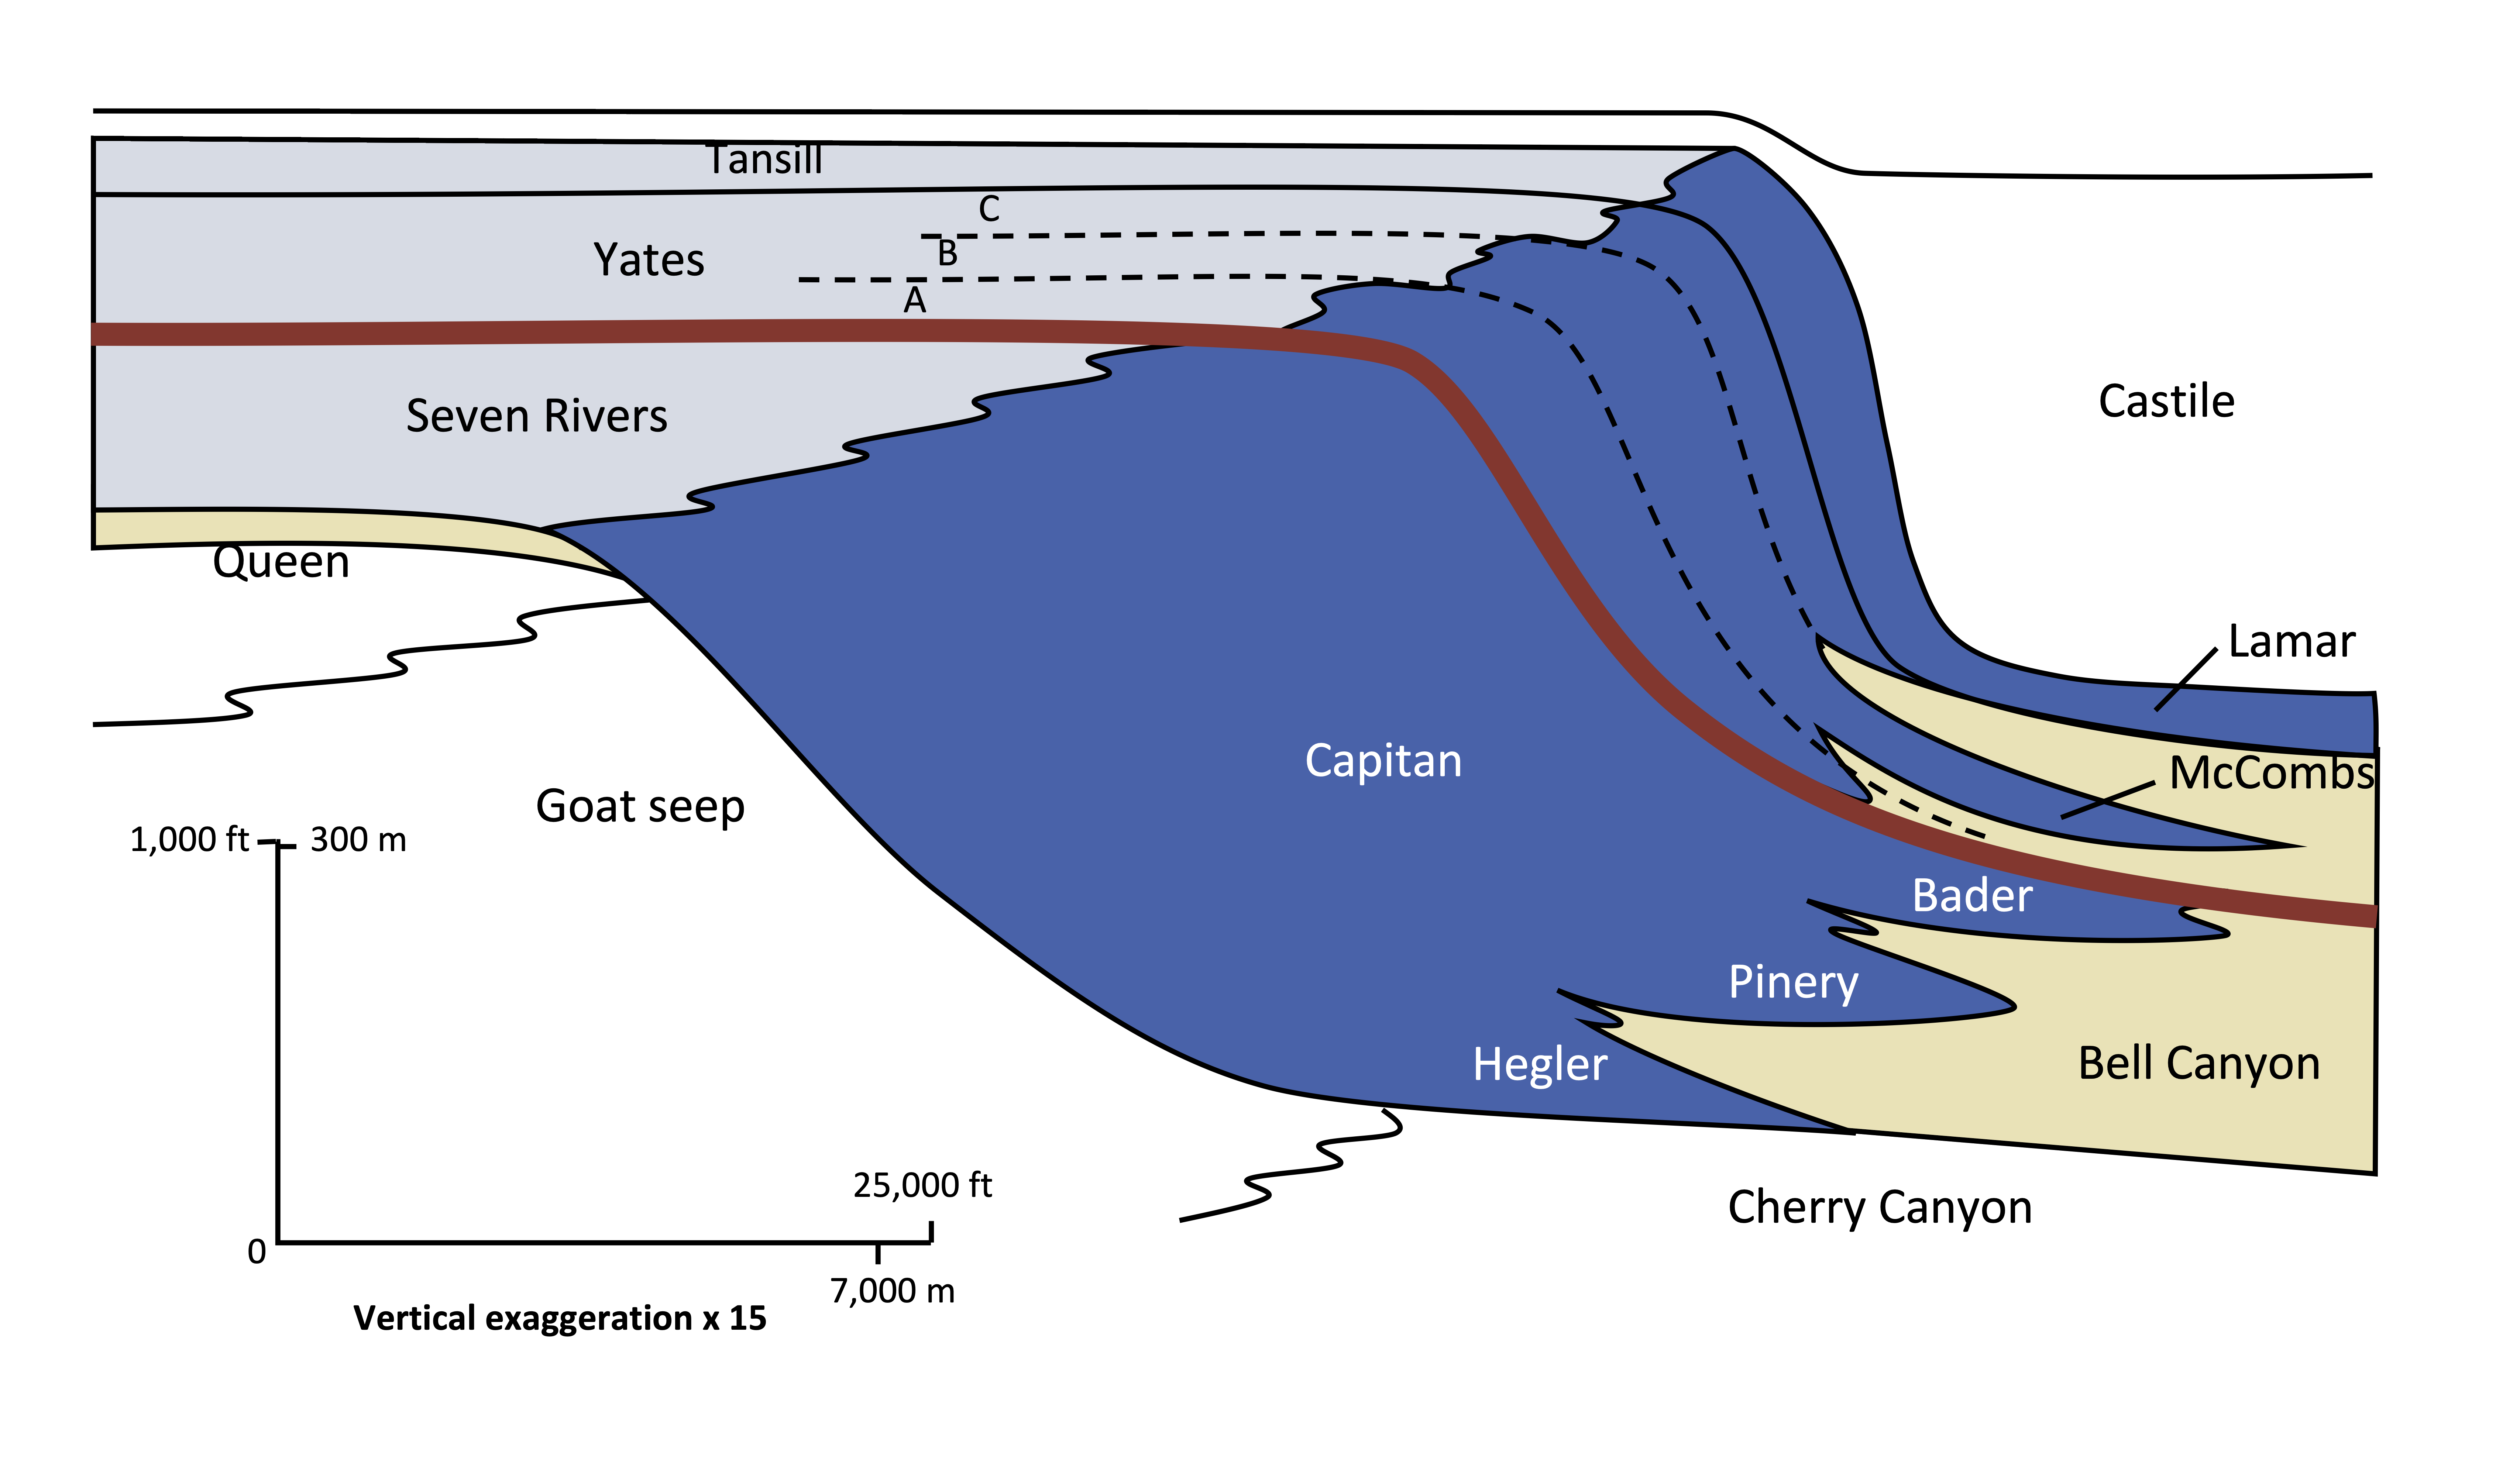 Cross-section showing three different rocks strata with unique lithology all being deposited at the same ancient time in nearby geographic areas.